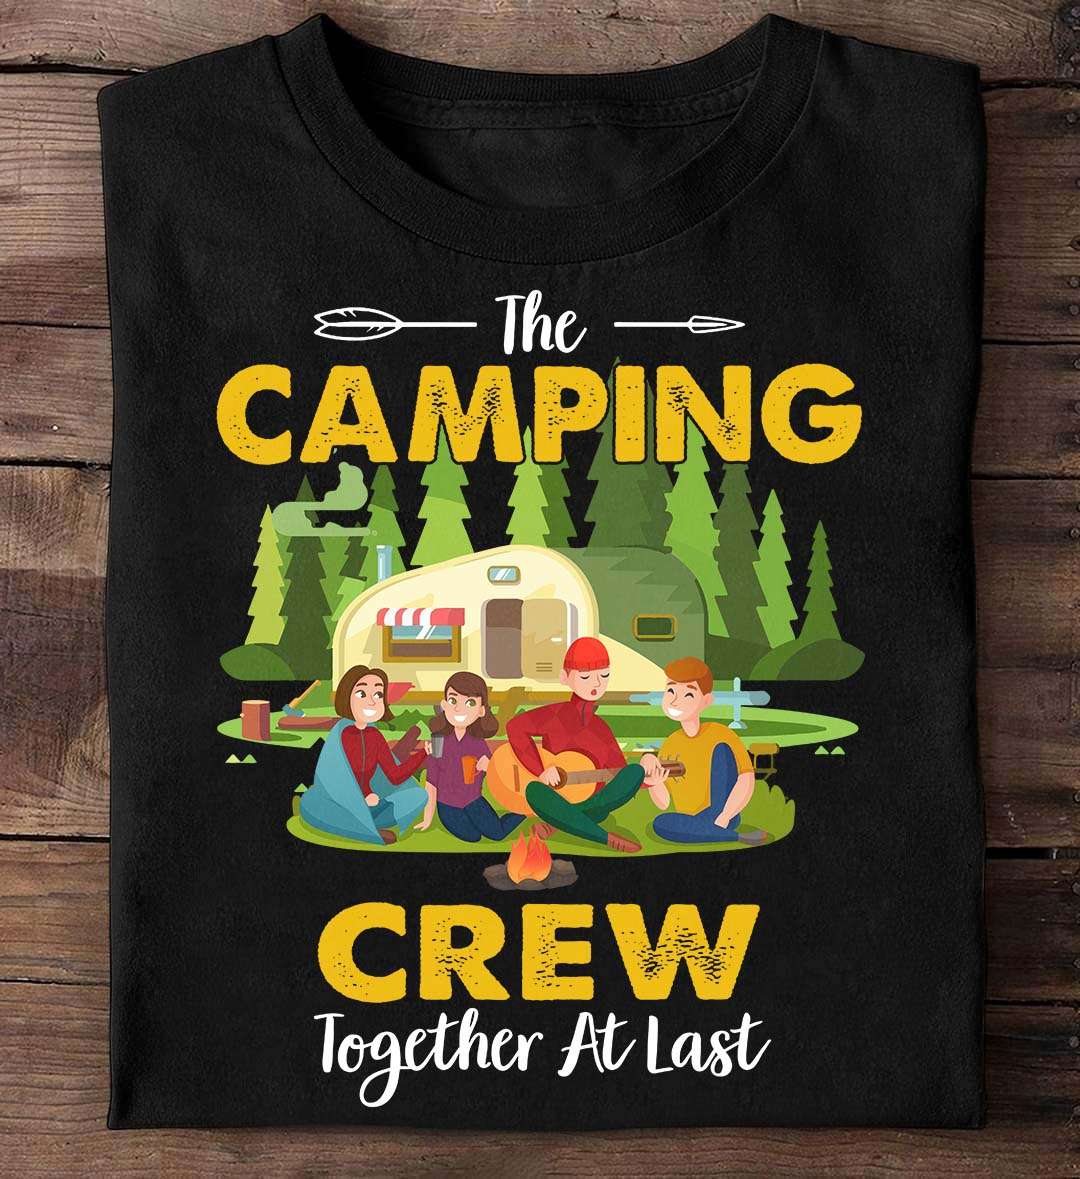 Camping With Friends - The camping crew together at last